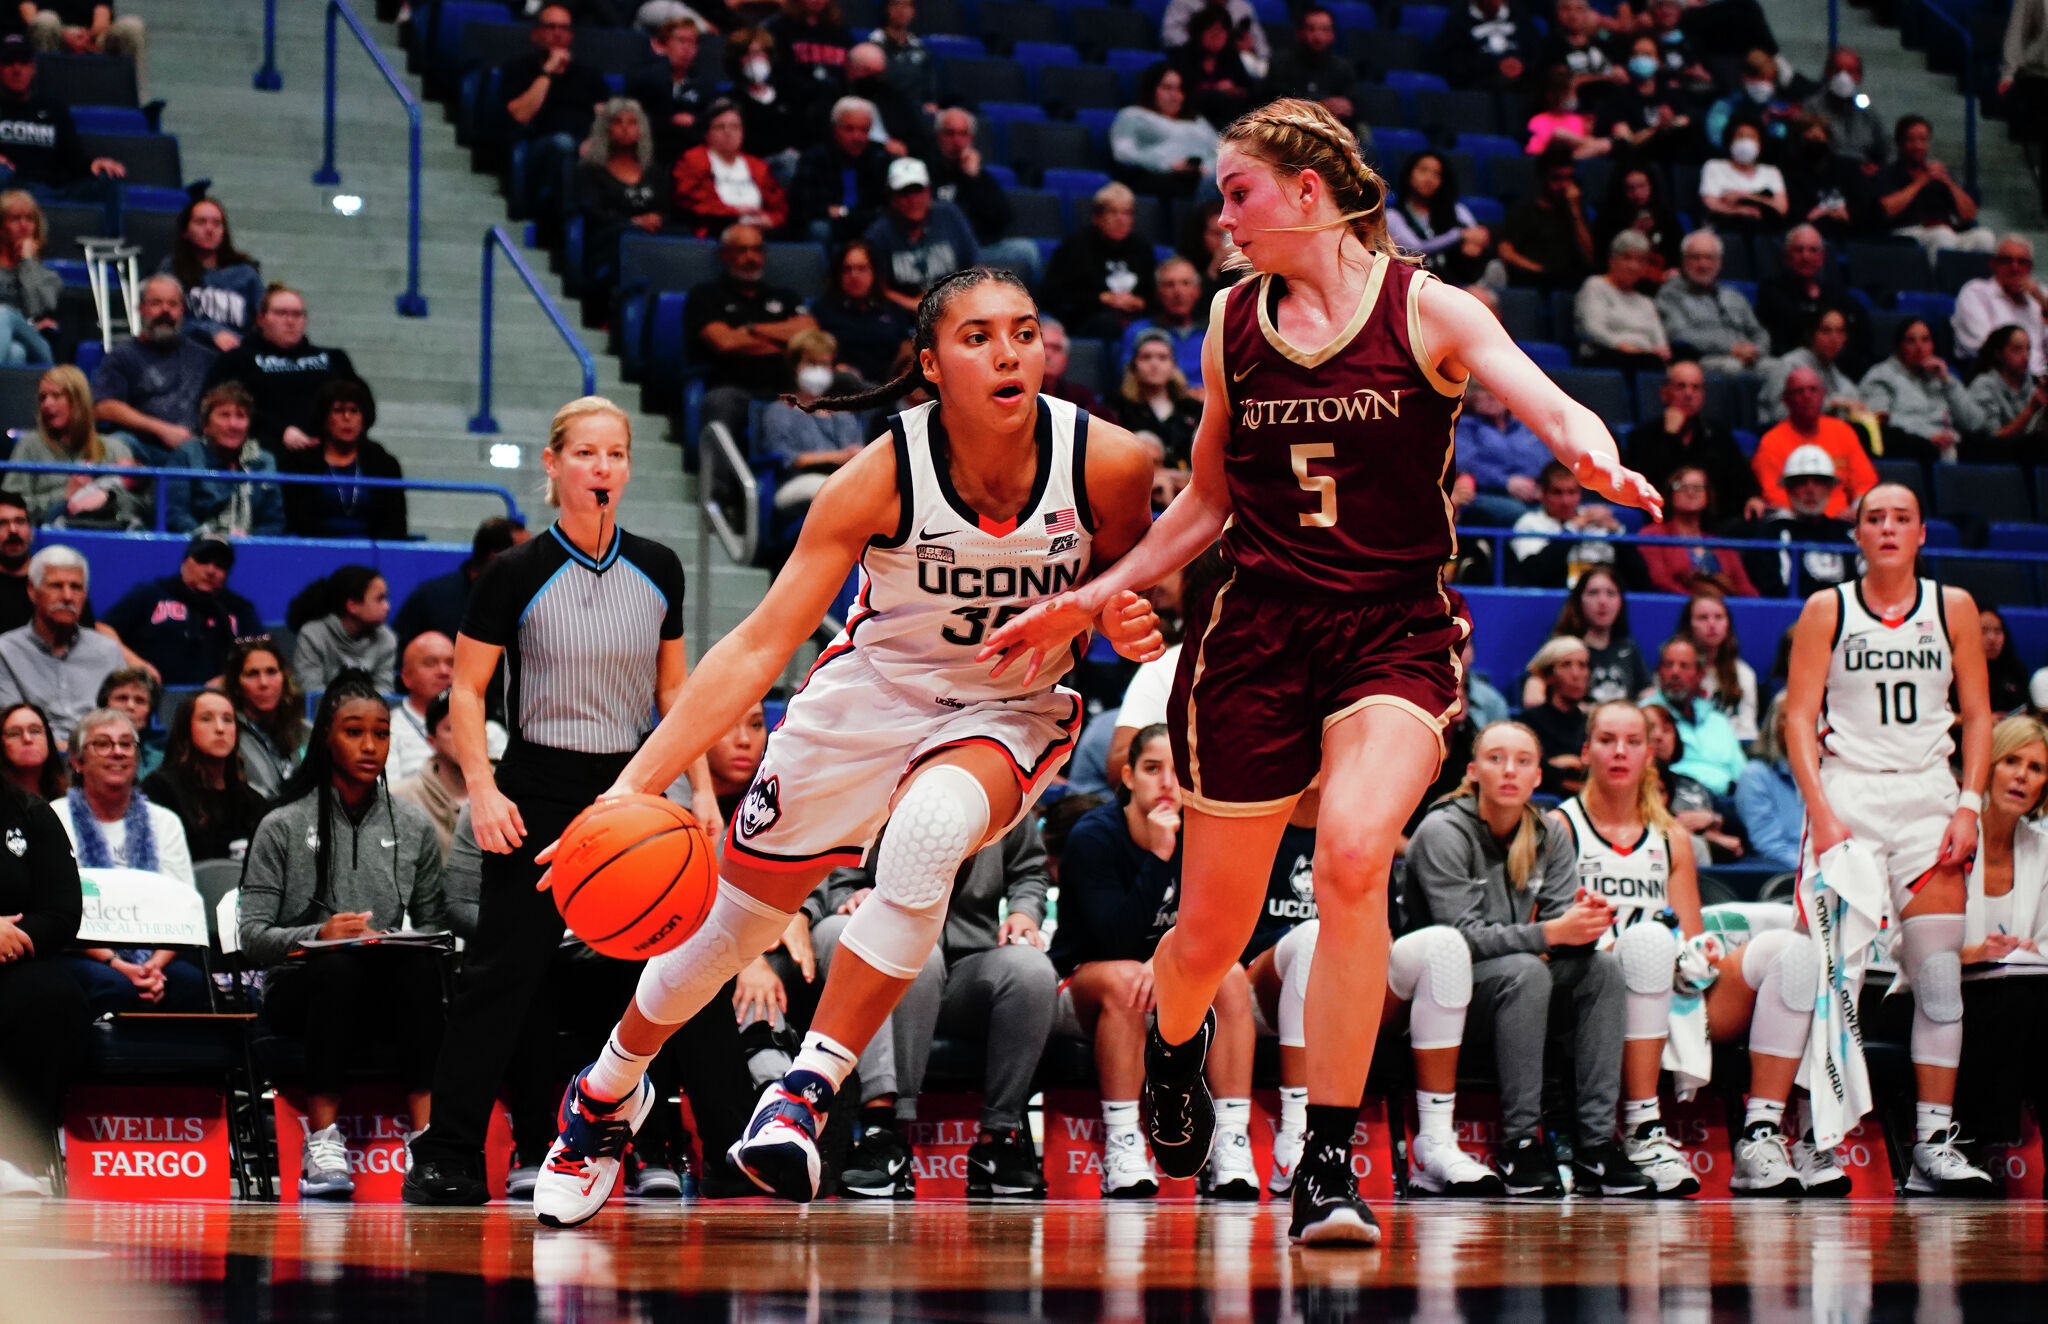 player-by-player-breakdown-of-the-uconn-women-s-basketball-team